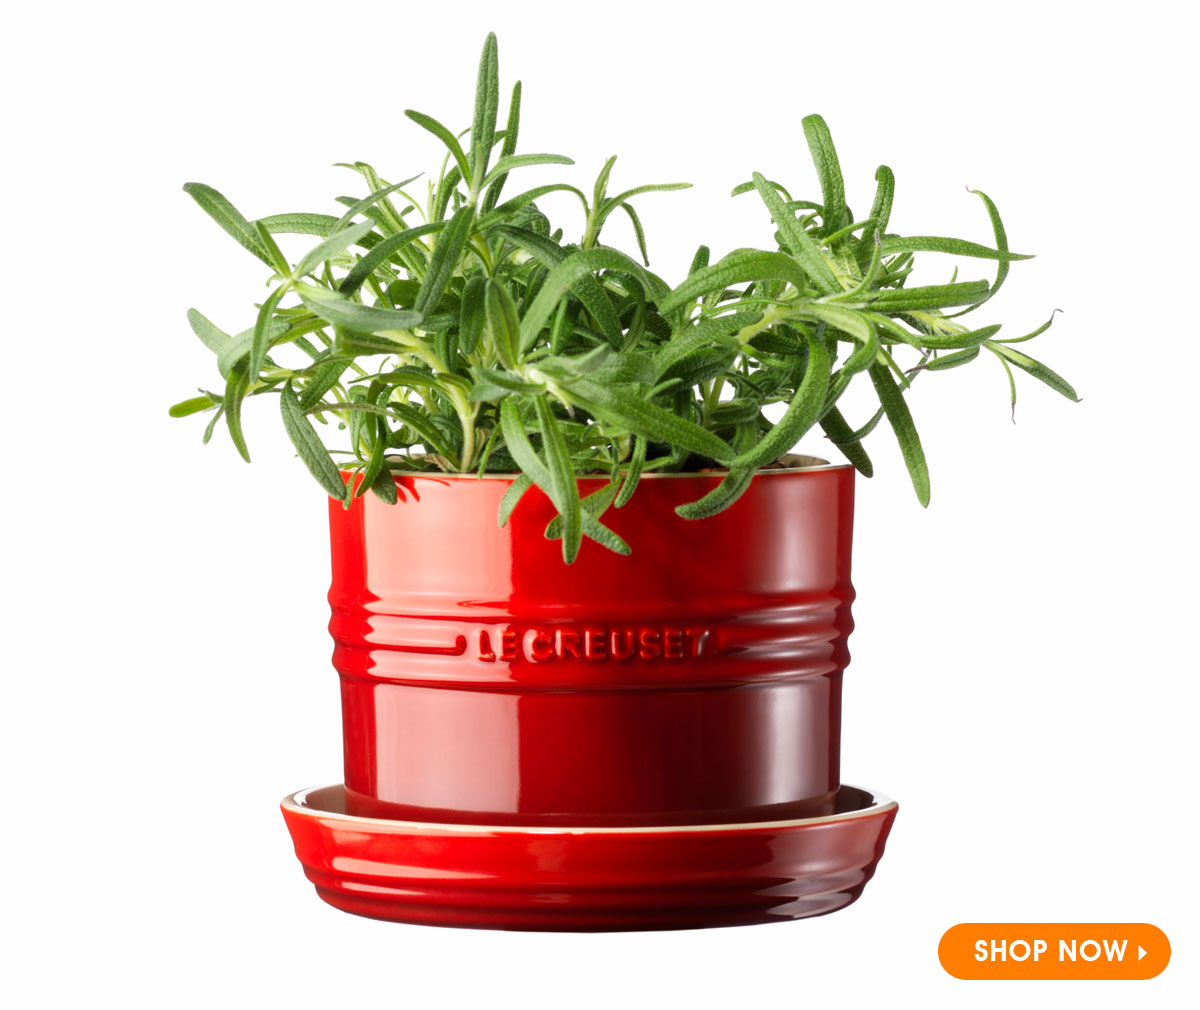 Le Creuset Herb Planter in Cherry